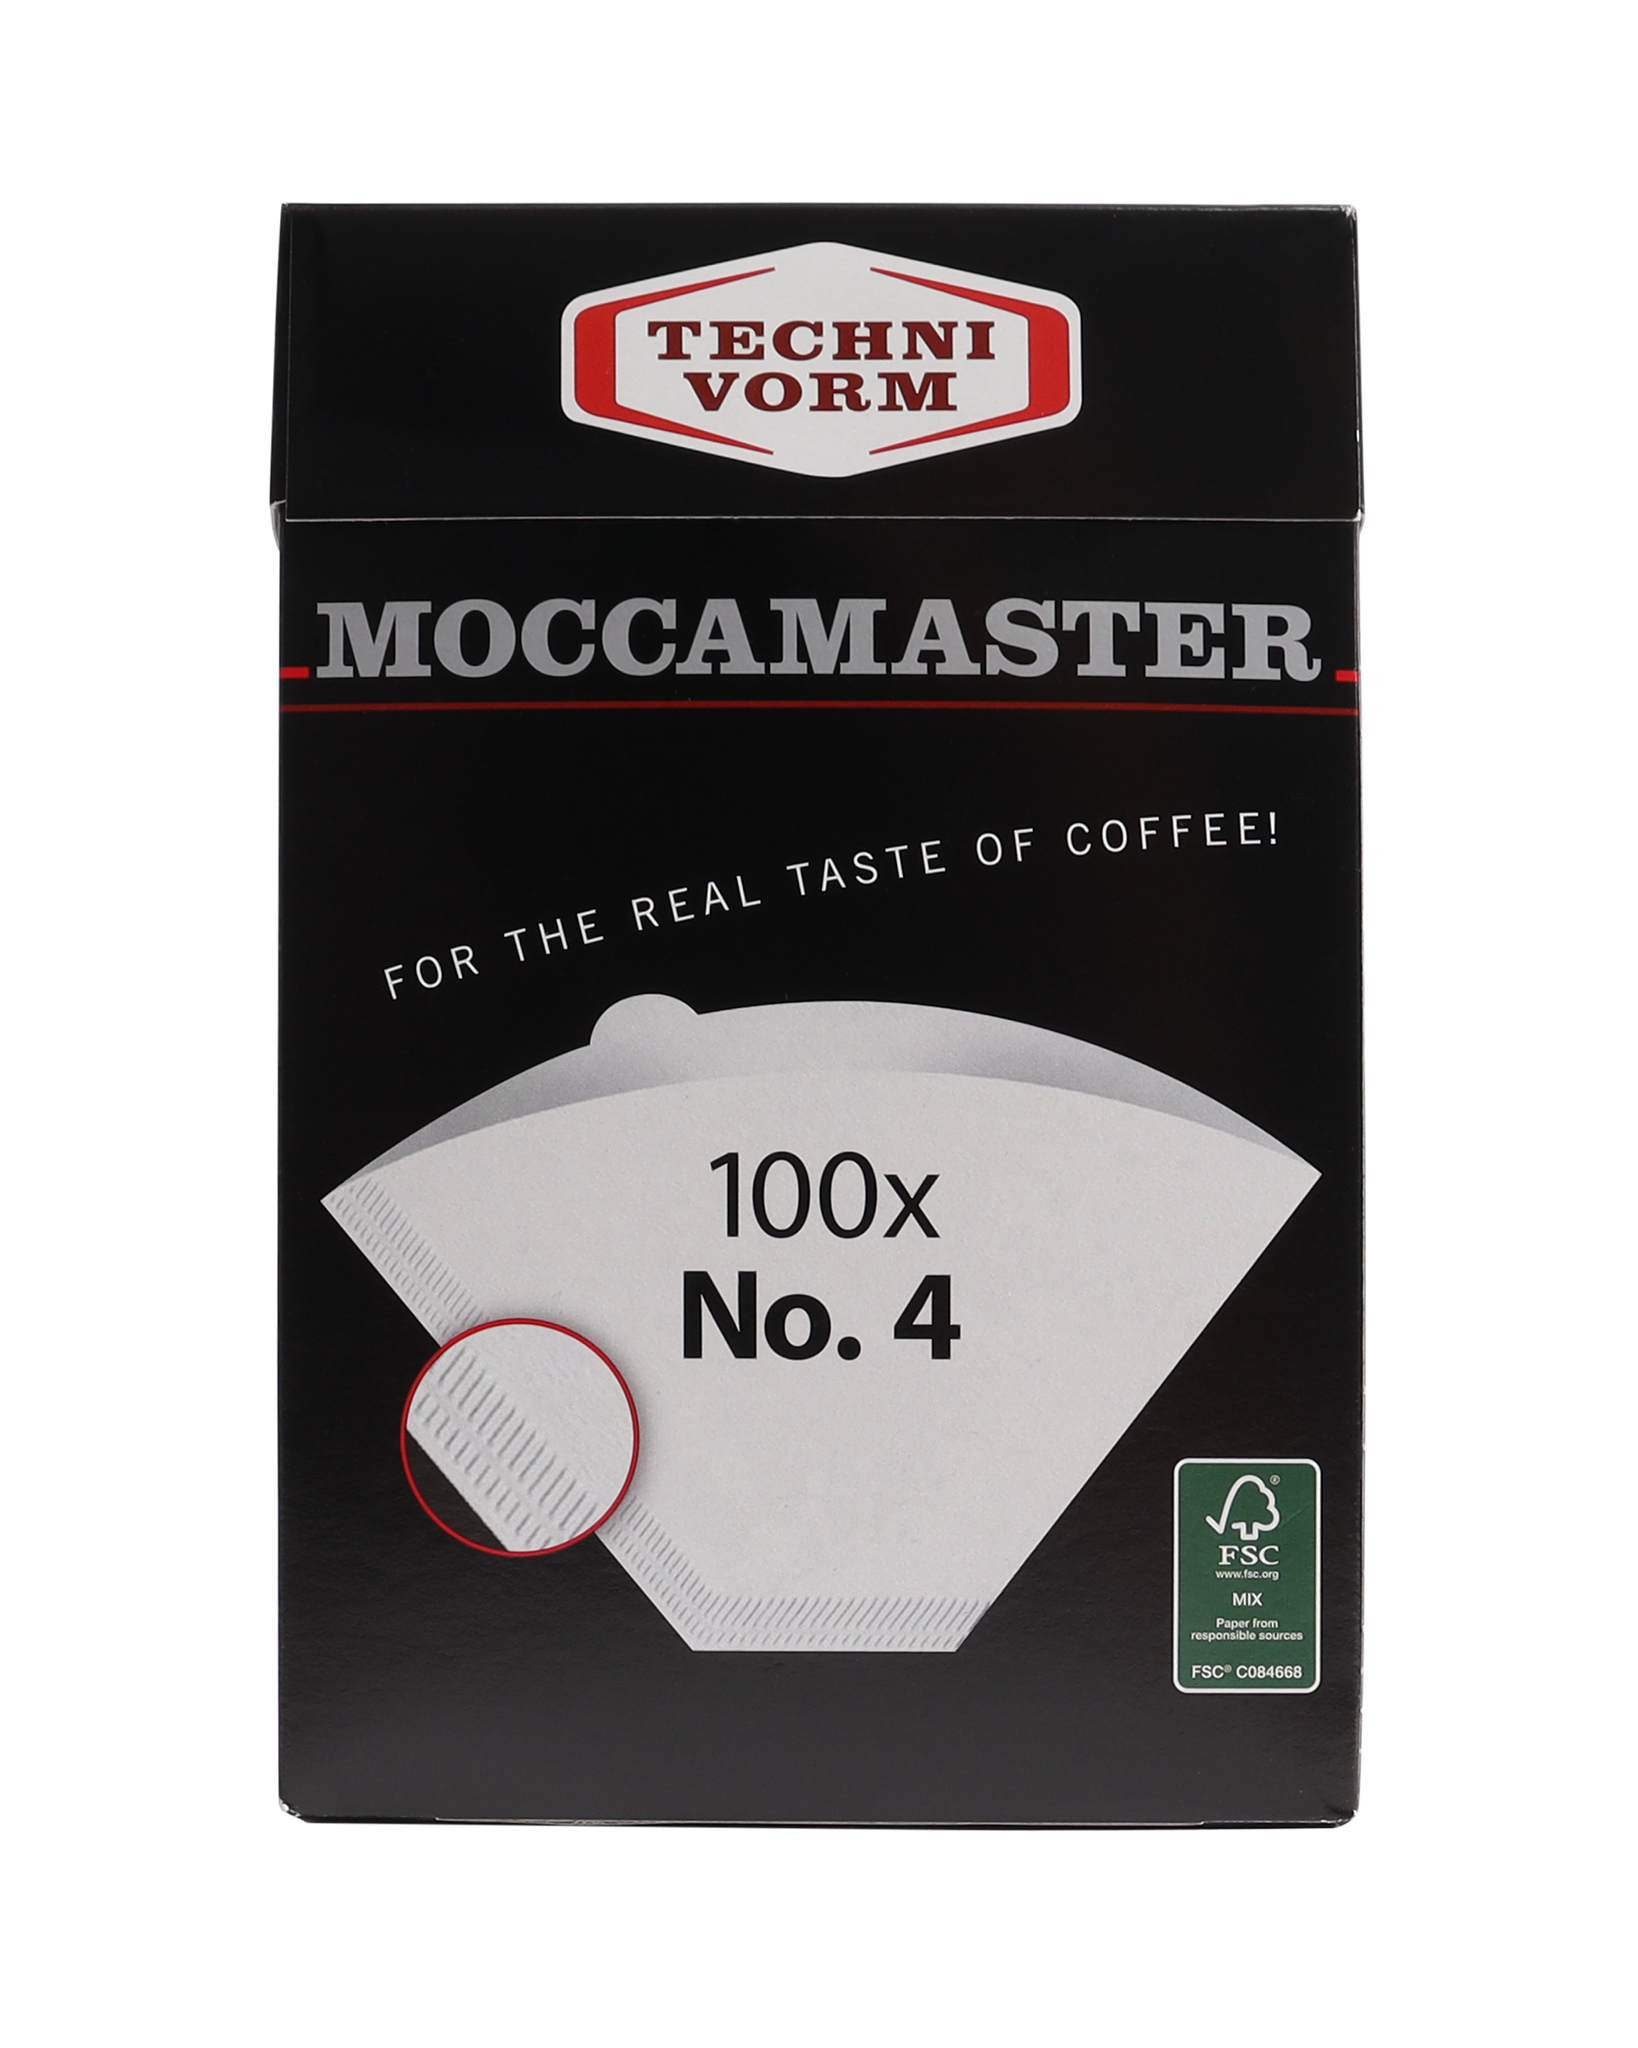 Moccamaster #4 White Paper Filters